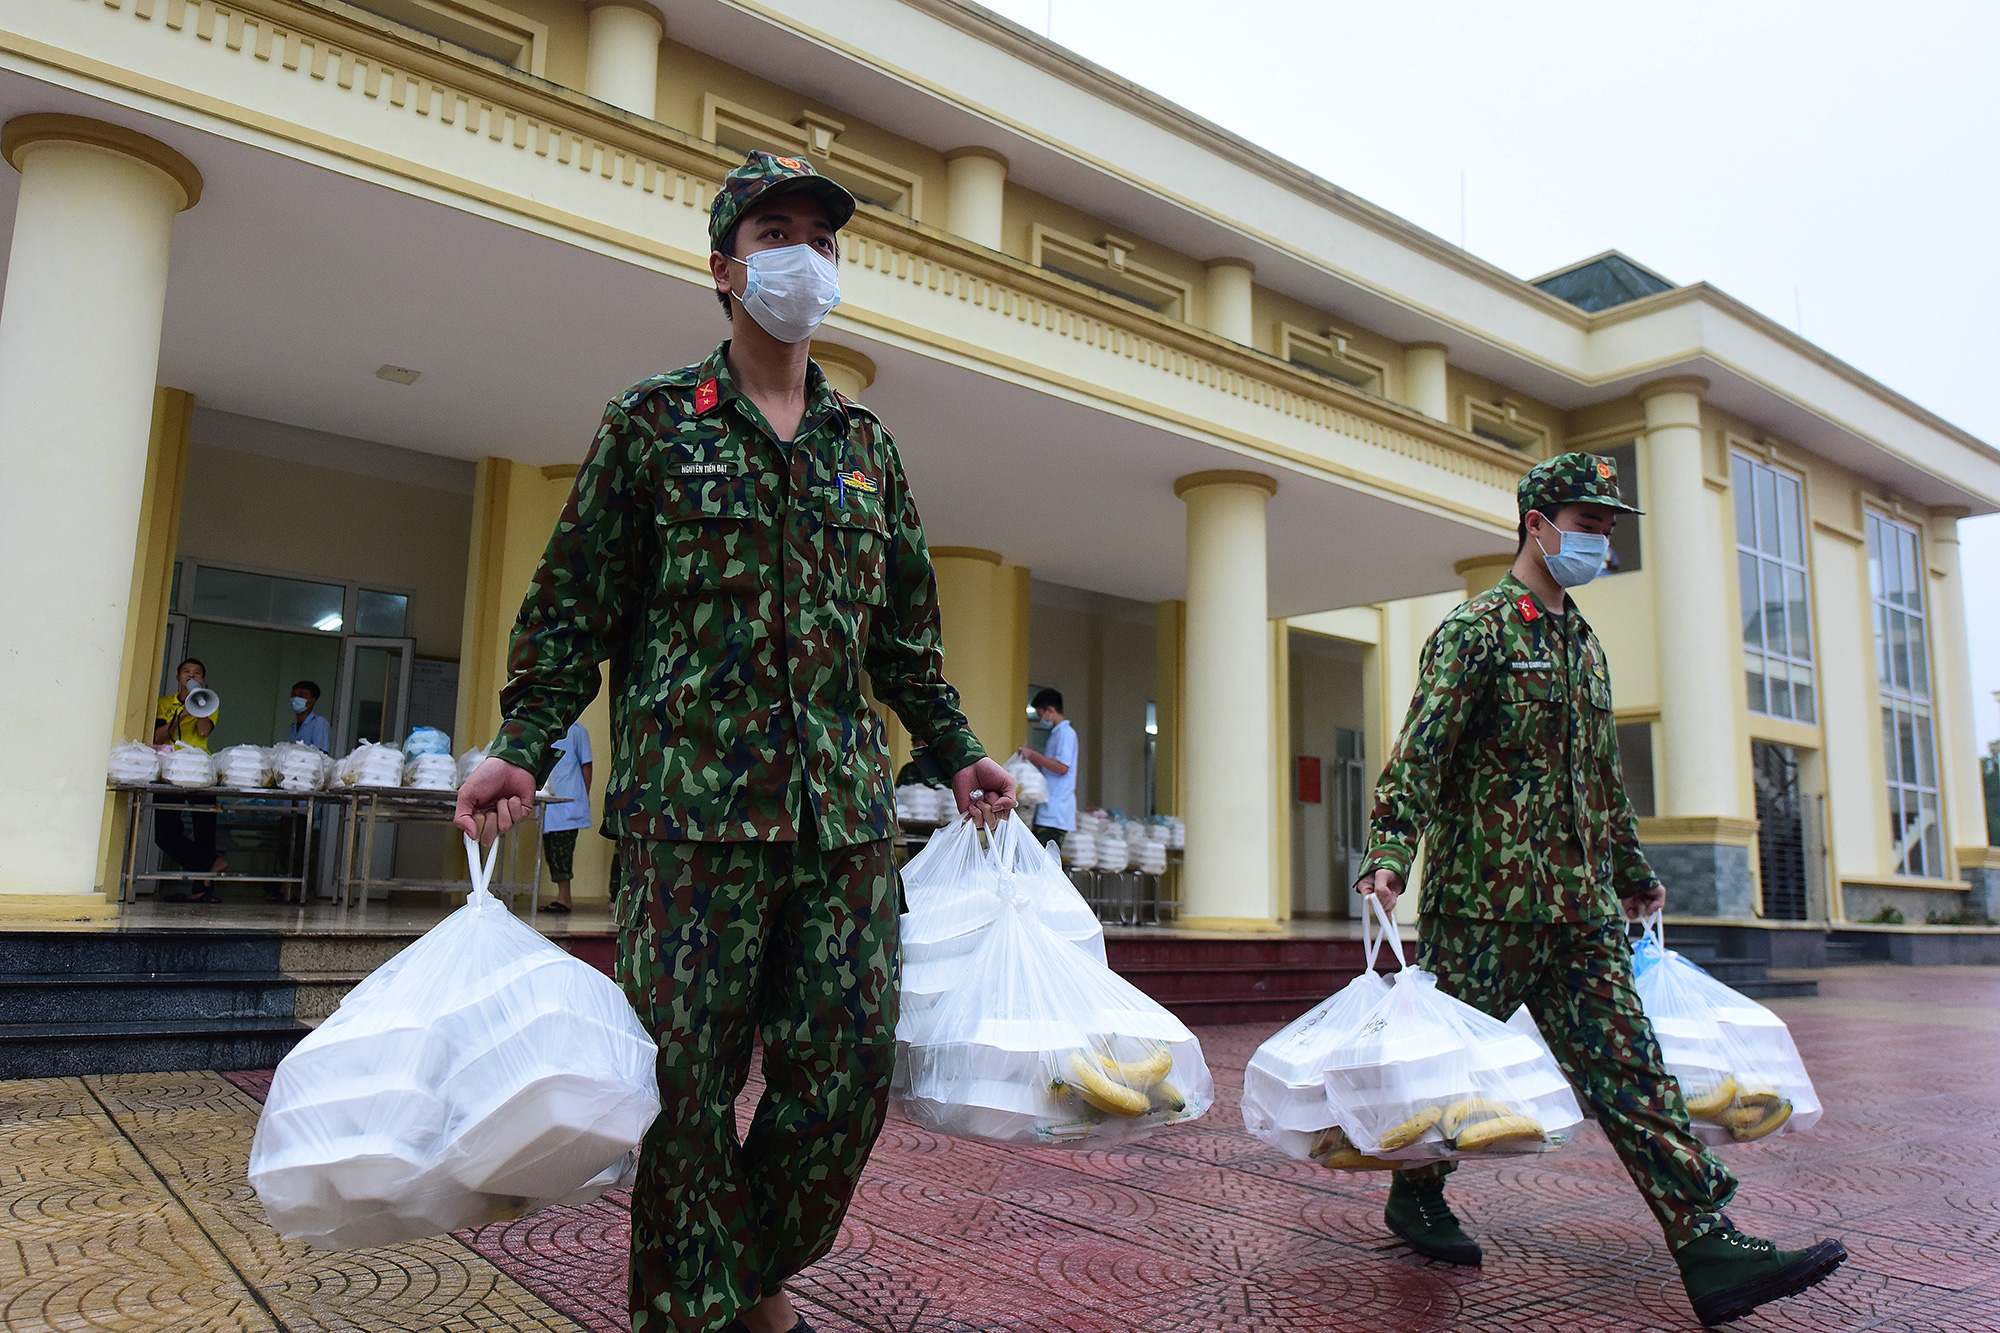 The Vietnamese military men keeping quarantined people well-fed and bouncing